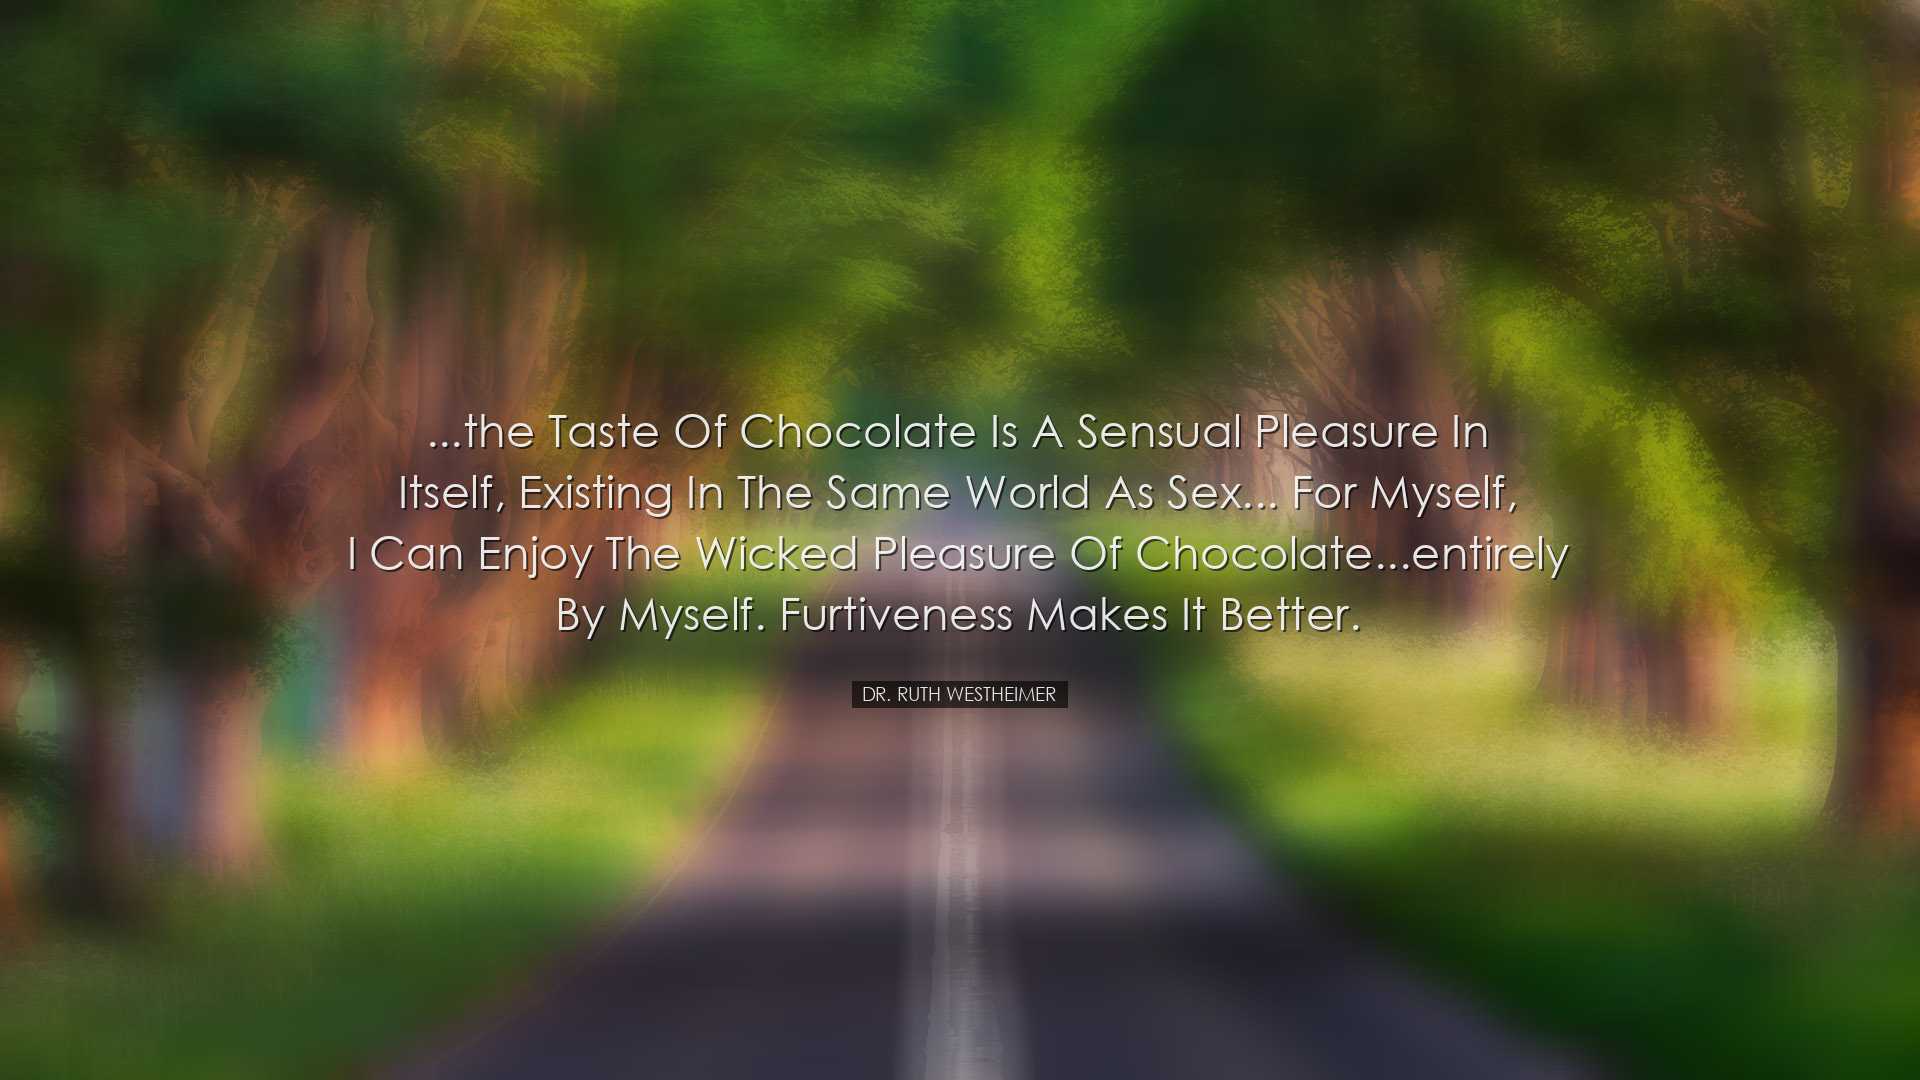 ...the taste of chocolate is a sensual pleasure in itself, existin